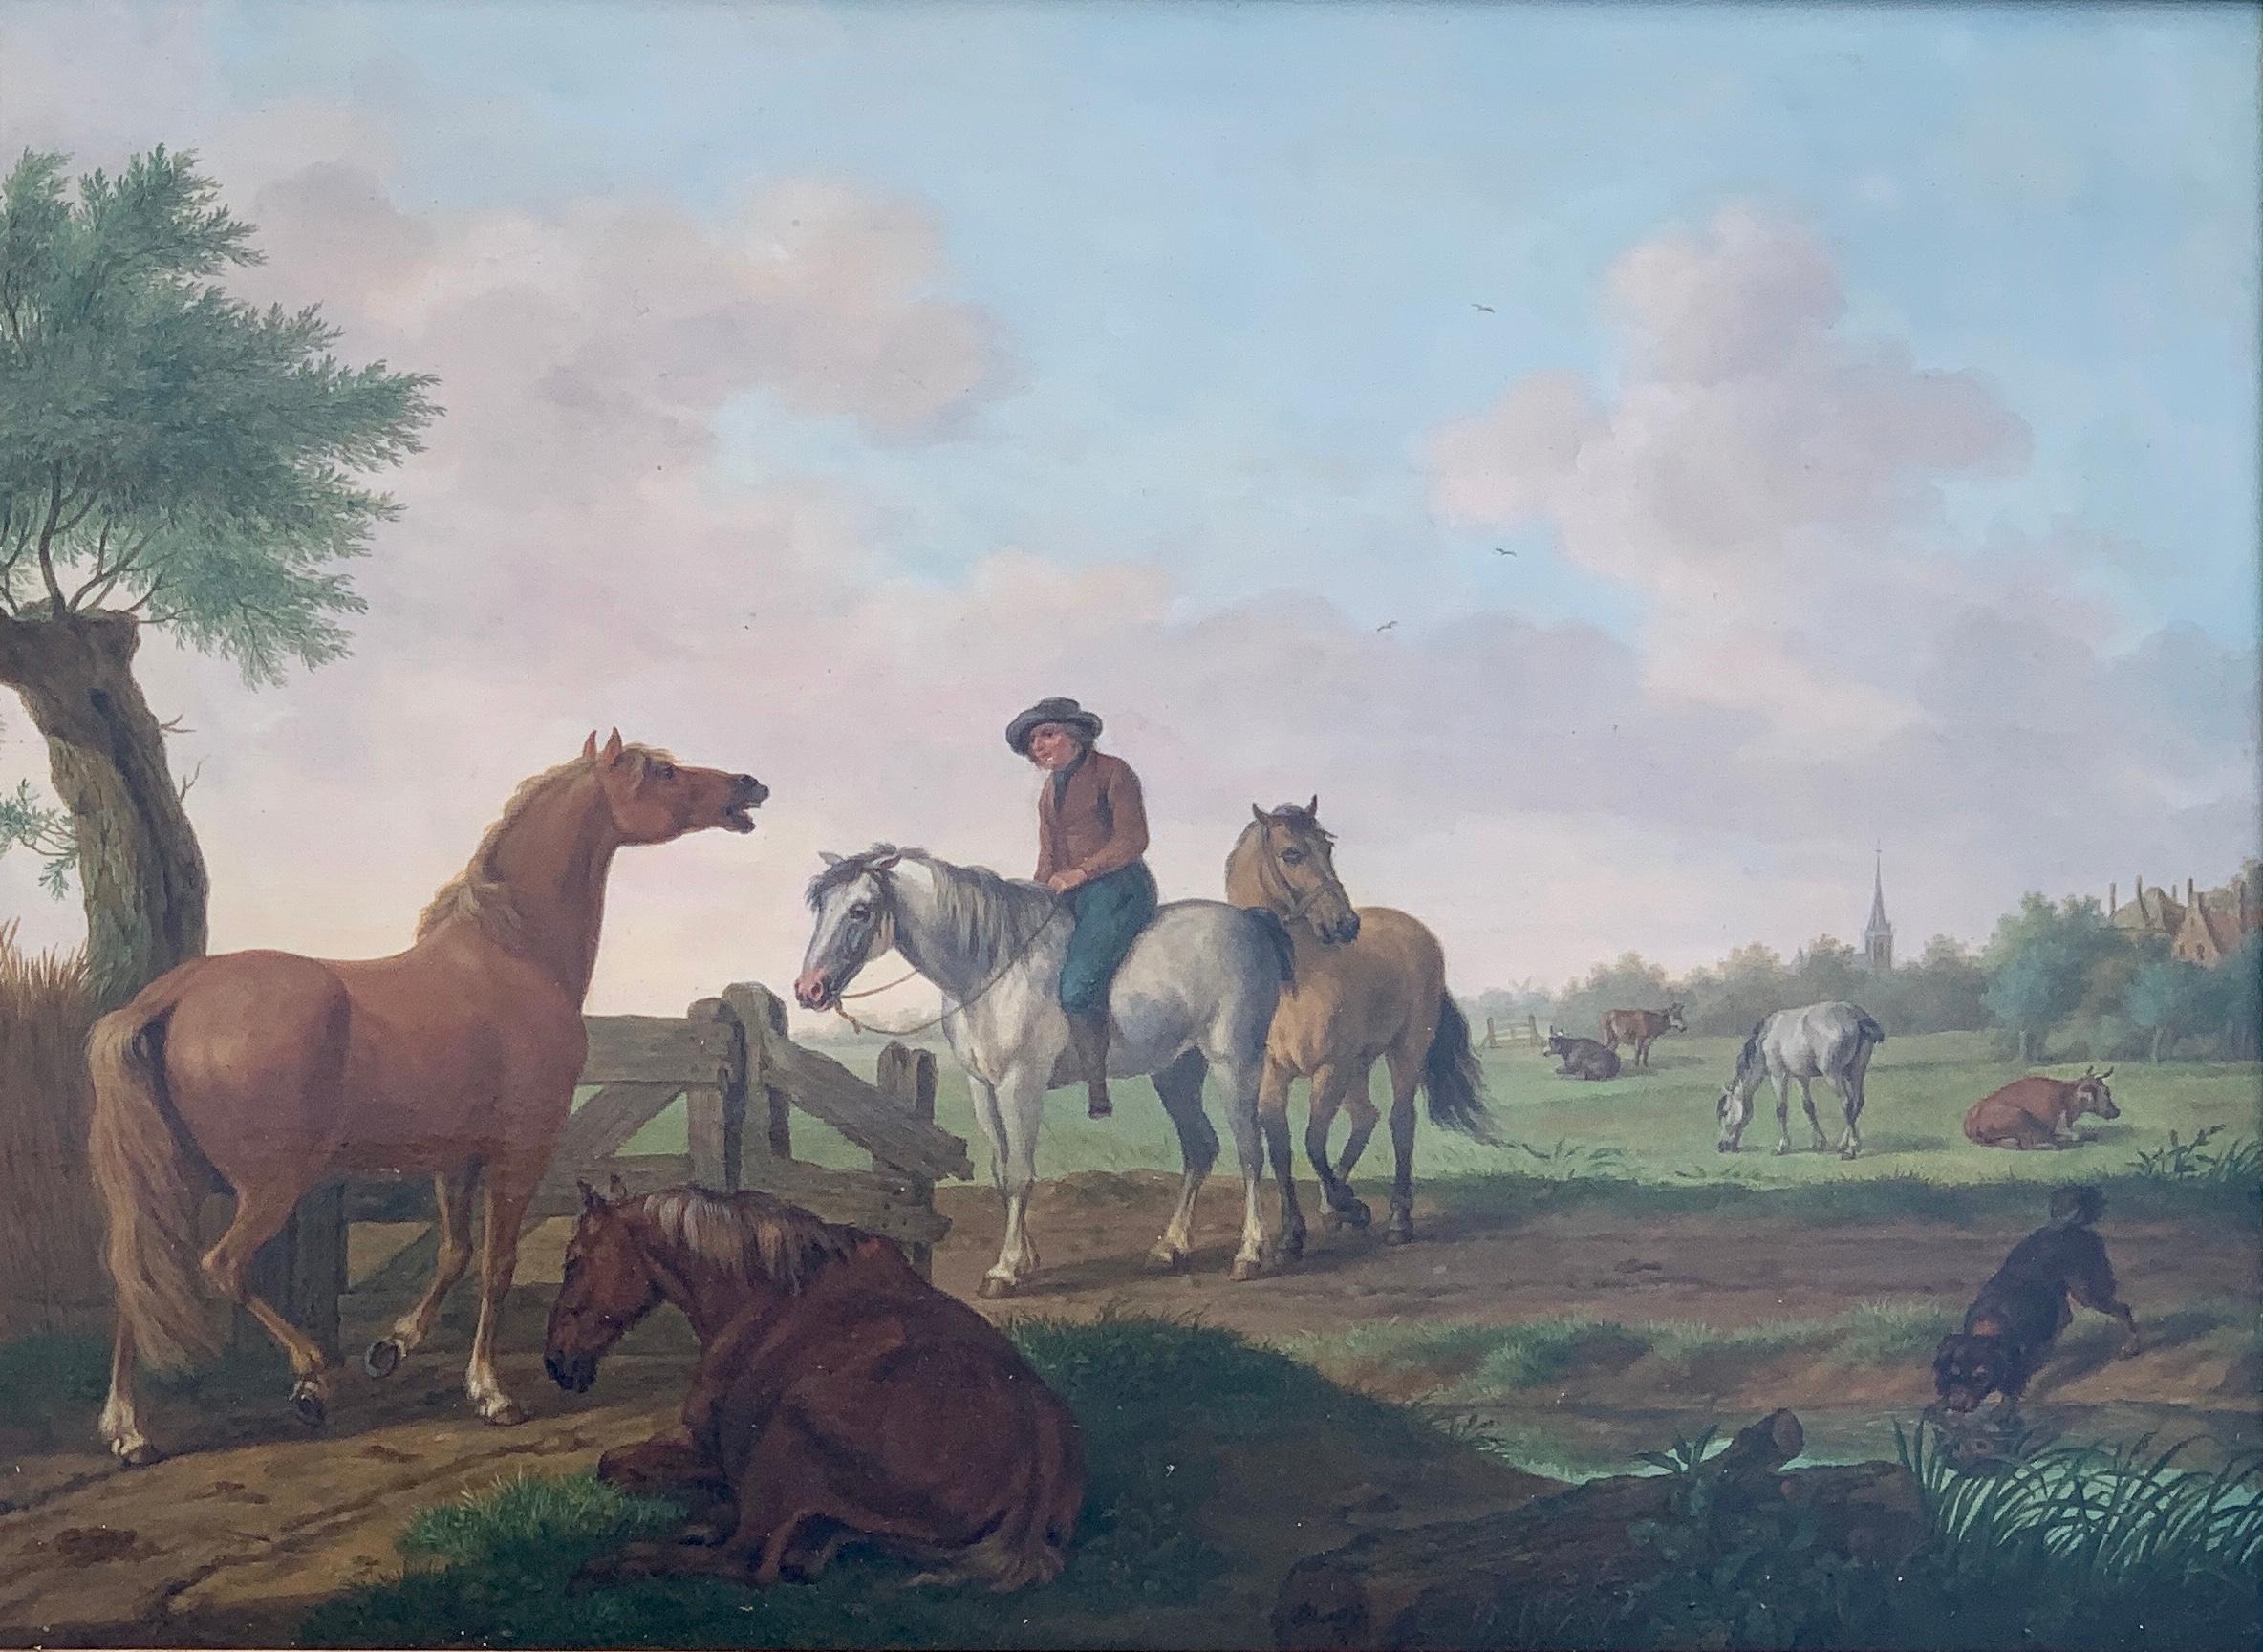 18th century Dutch oil of men on horses with landscape, and dog by a pond - Painting by Tethart Philip Christiaan Haag